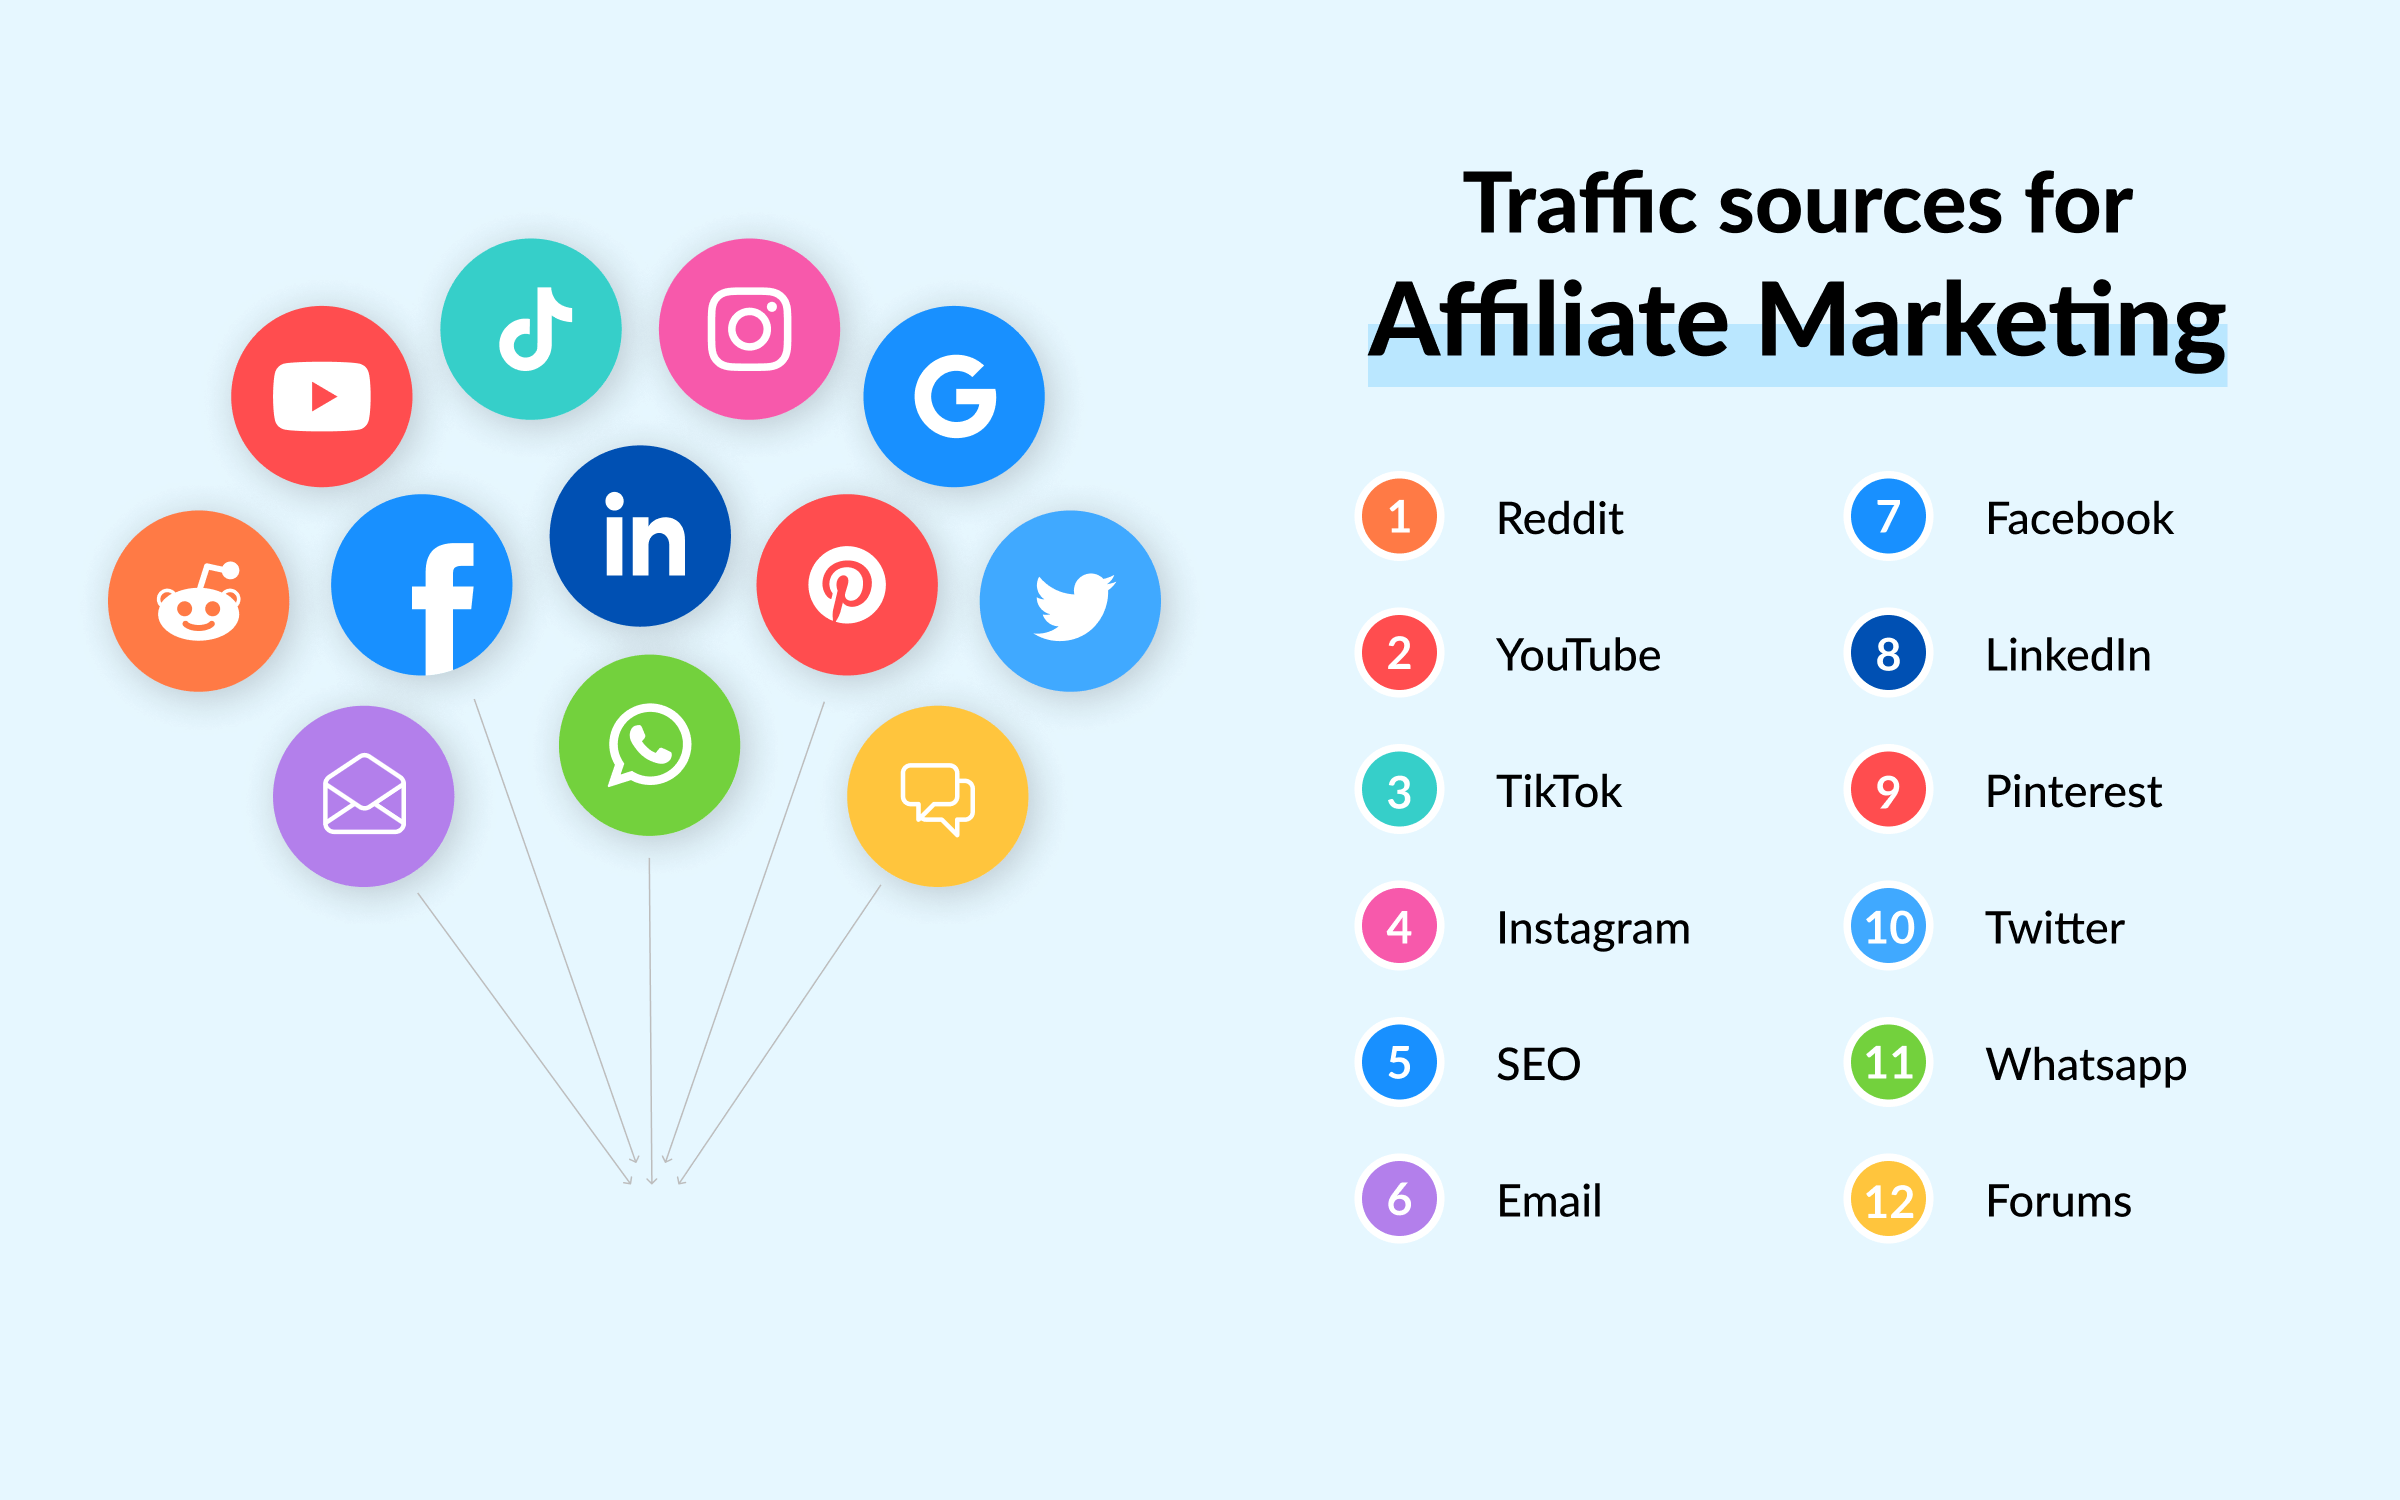 Traffic sources for affiliate marketing explained